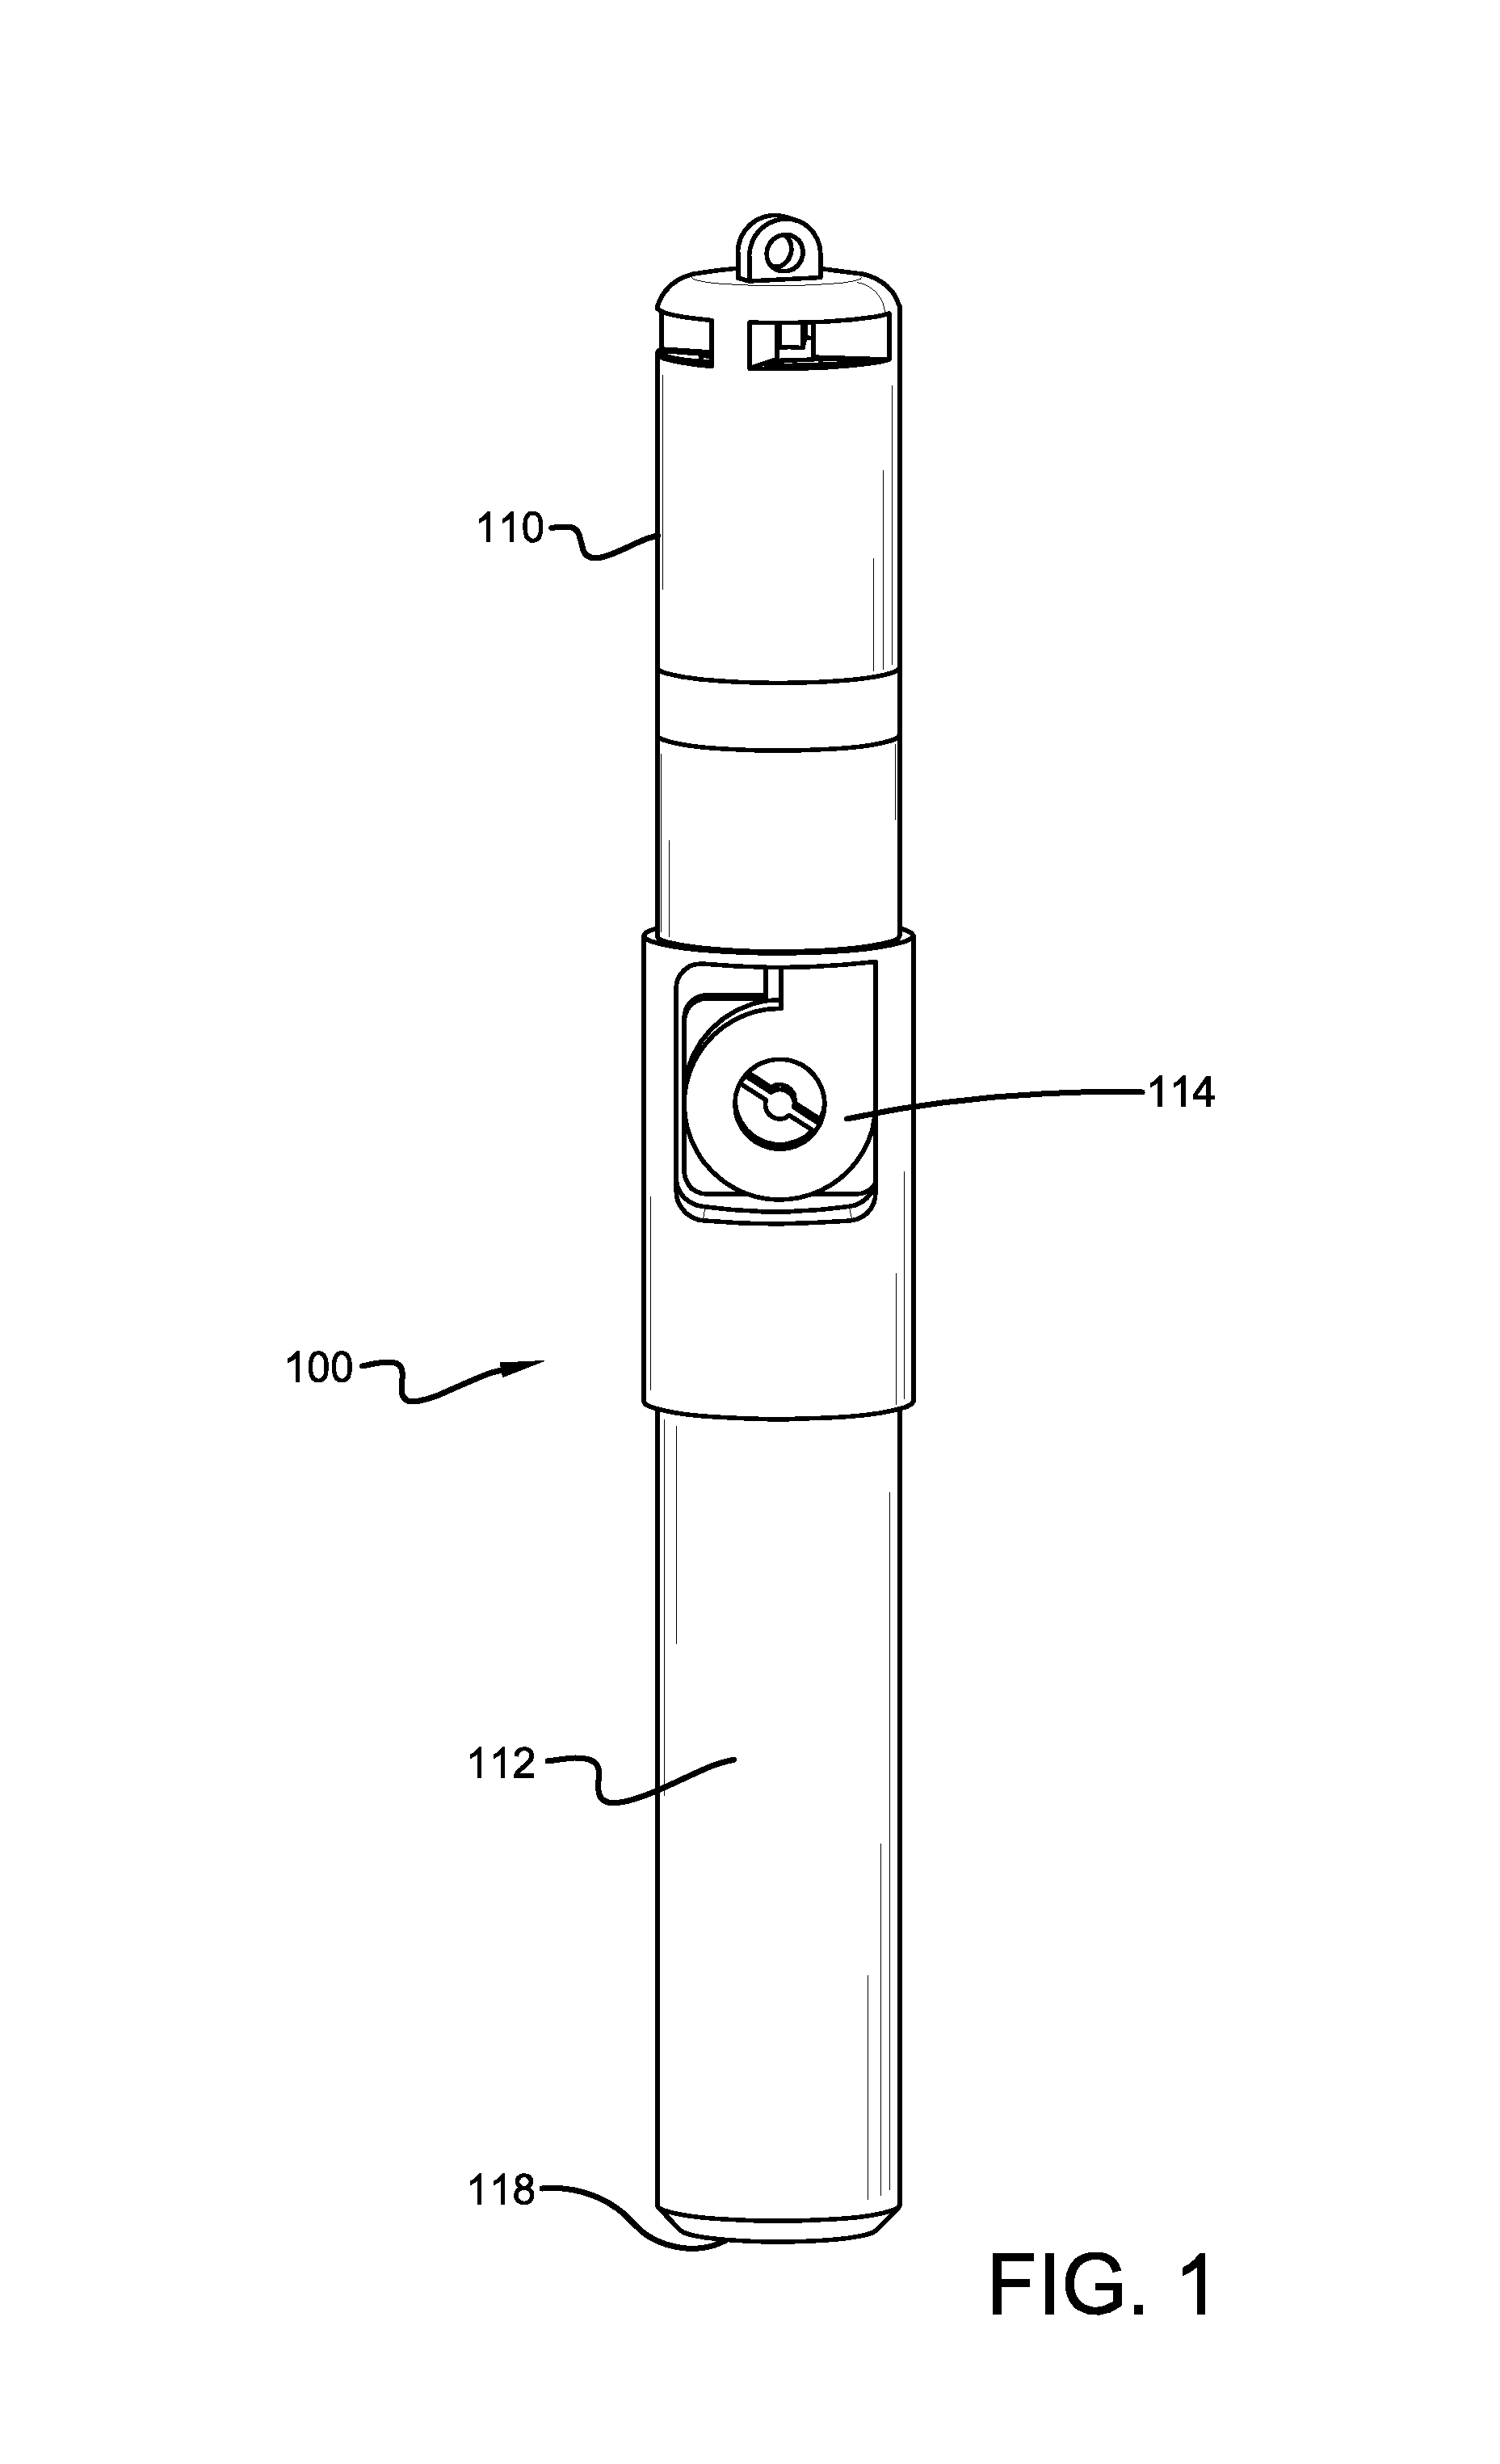 Device for creating and distributing vaporized scent